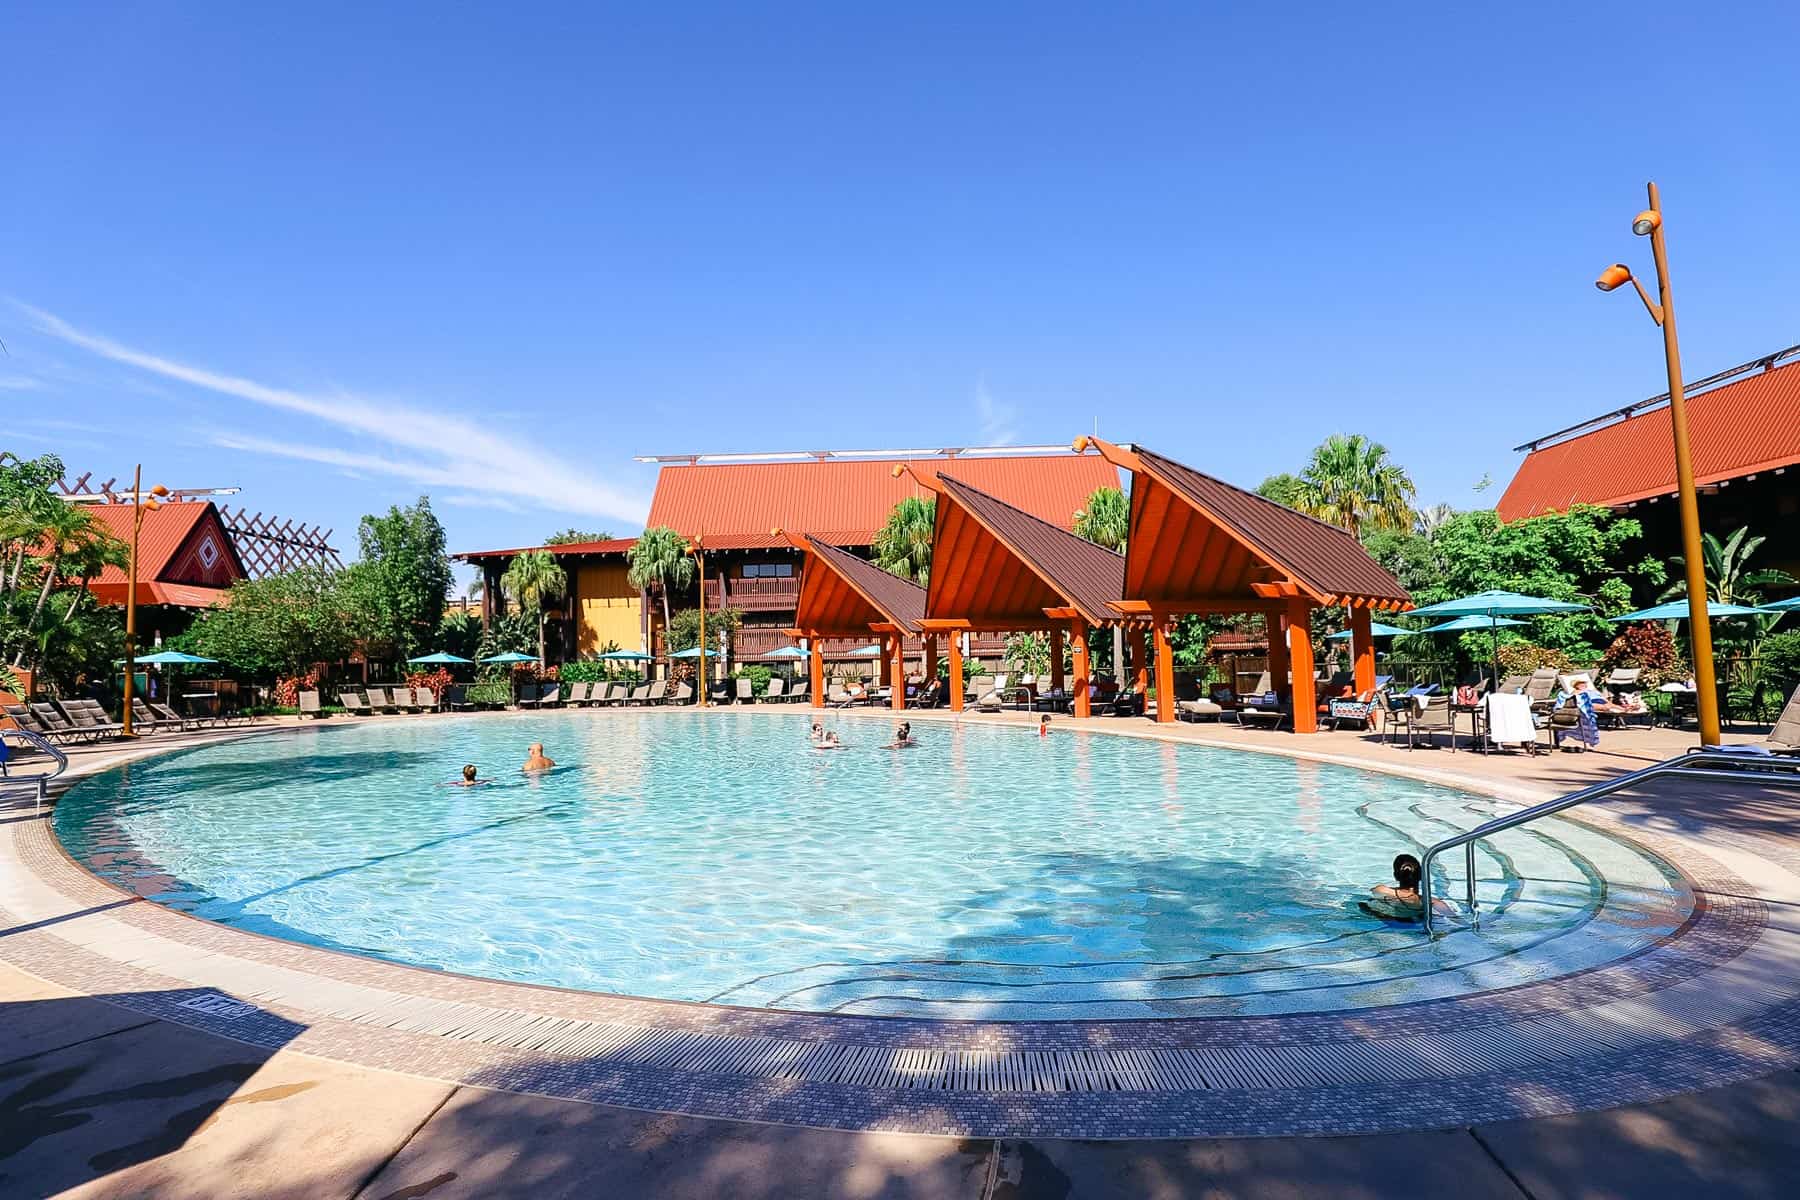 The Oasis pool's oval shape with cabanas in the background.